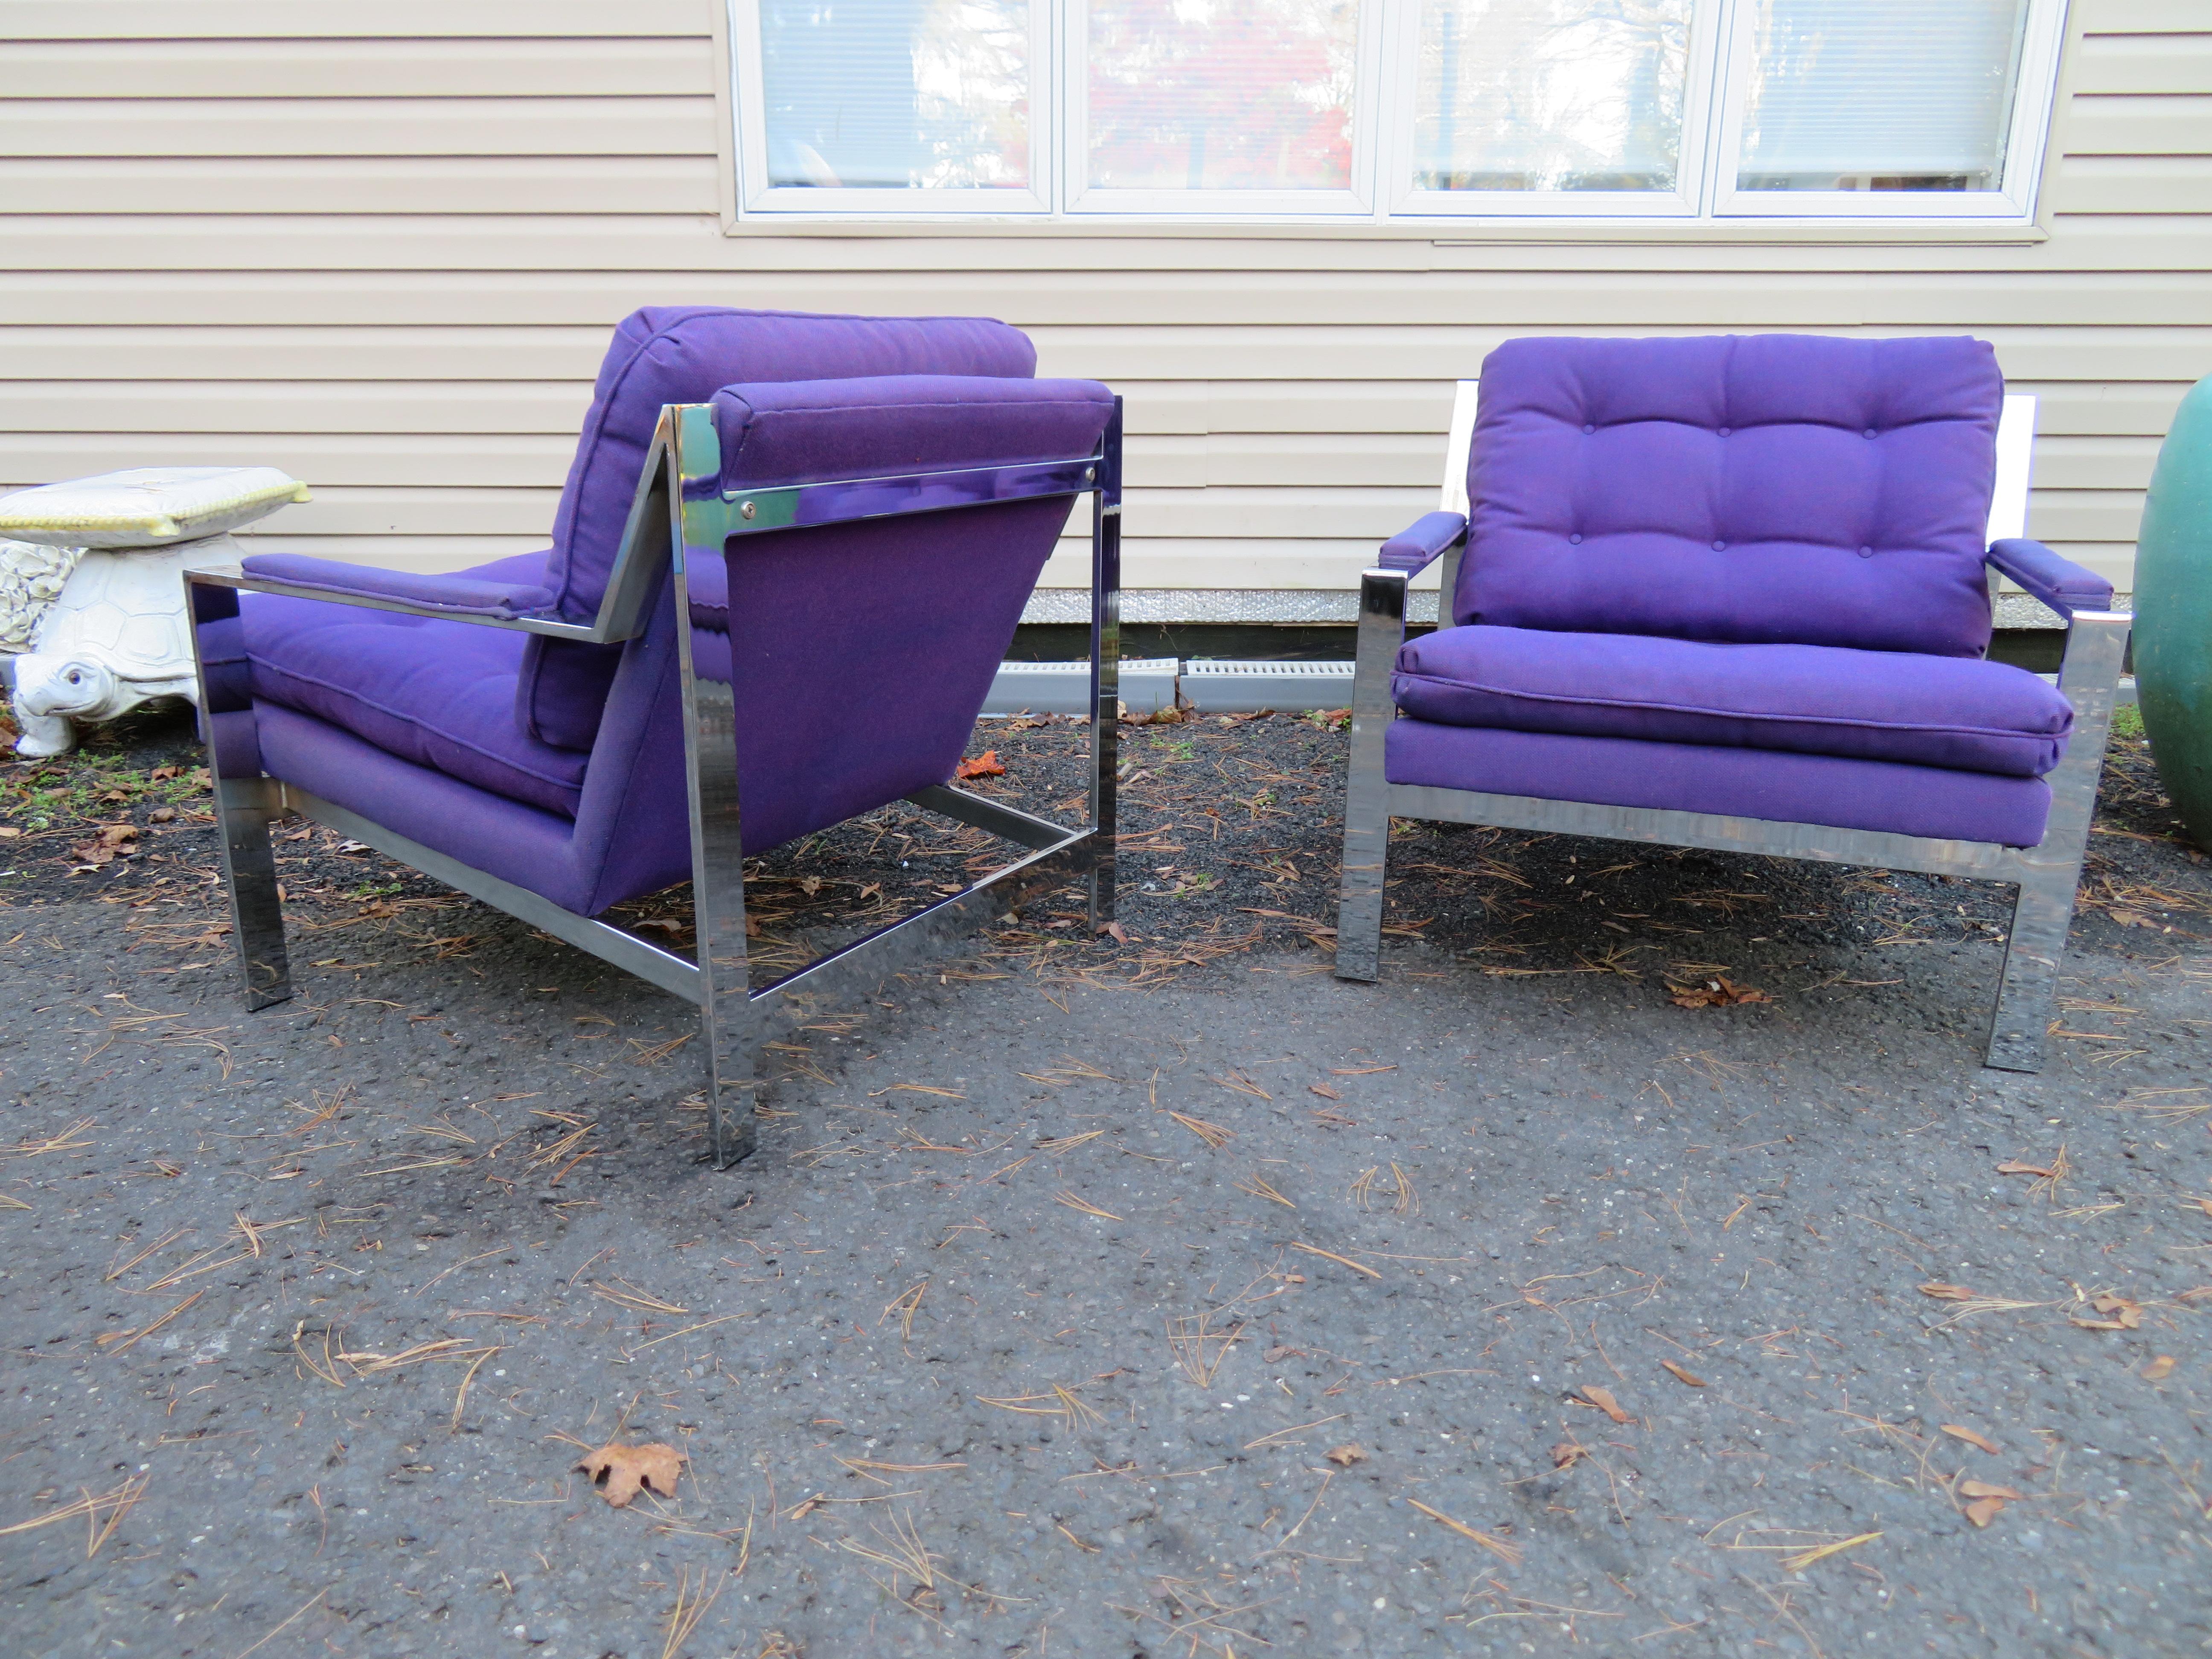 Handsome pair of Cy Mann chrome lounge cube chairs. These chairs are often misattributed to Milo Baughman but both are brilliant mid-century designers! This pair retains their original purple woven fabric in wonderful vintage condition-very usable